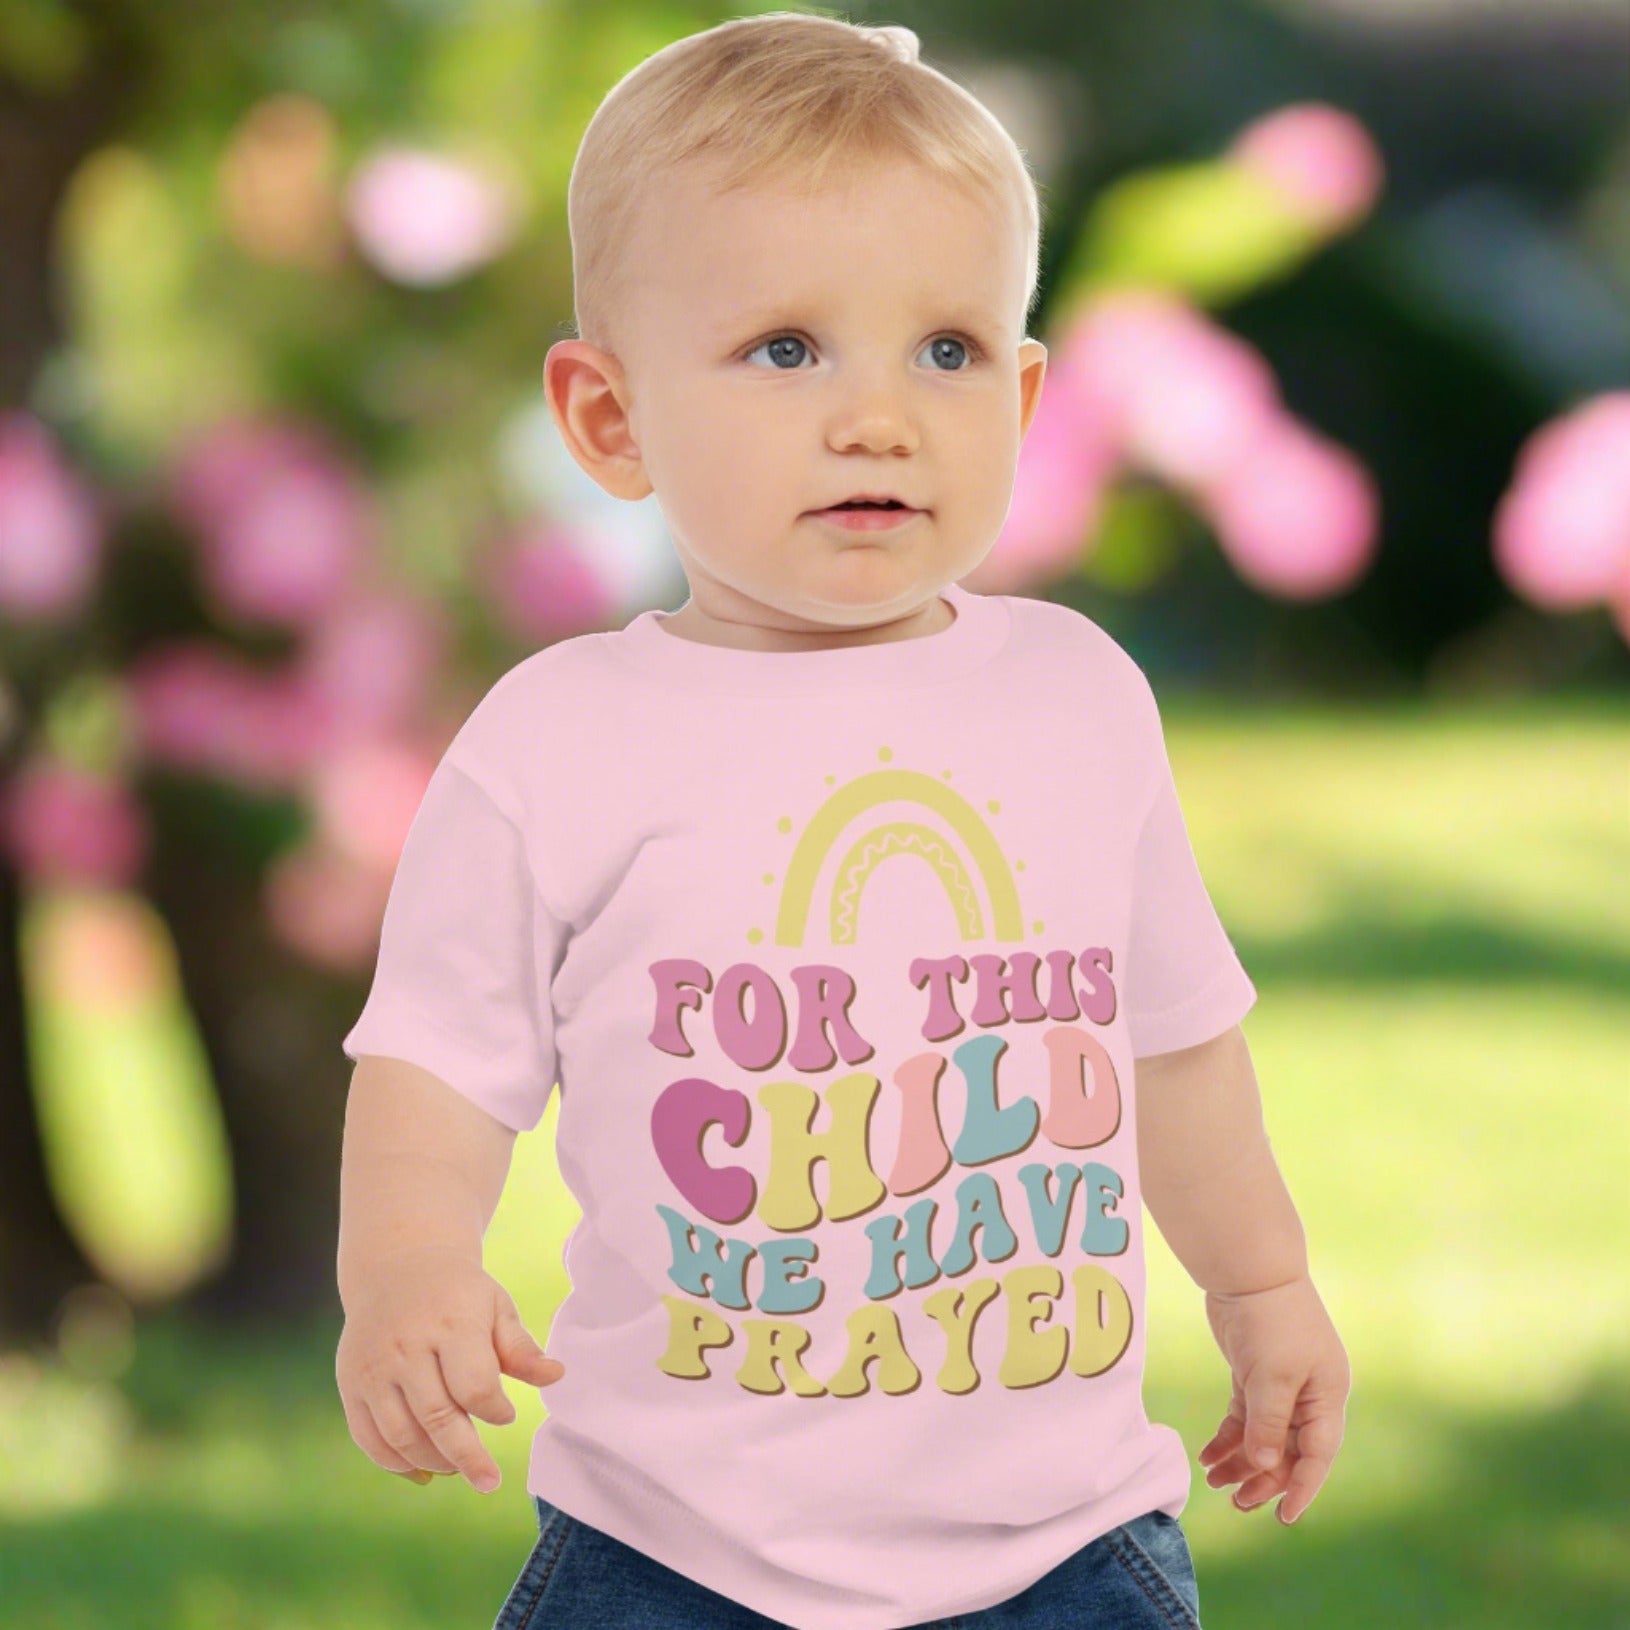 For This Child We Have Prayed Toddler Jersey Short Sleeve Tee